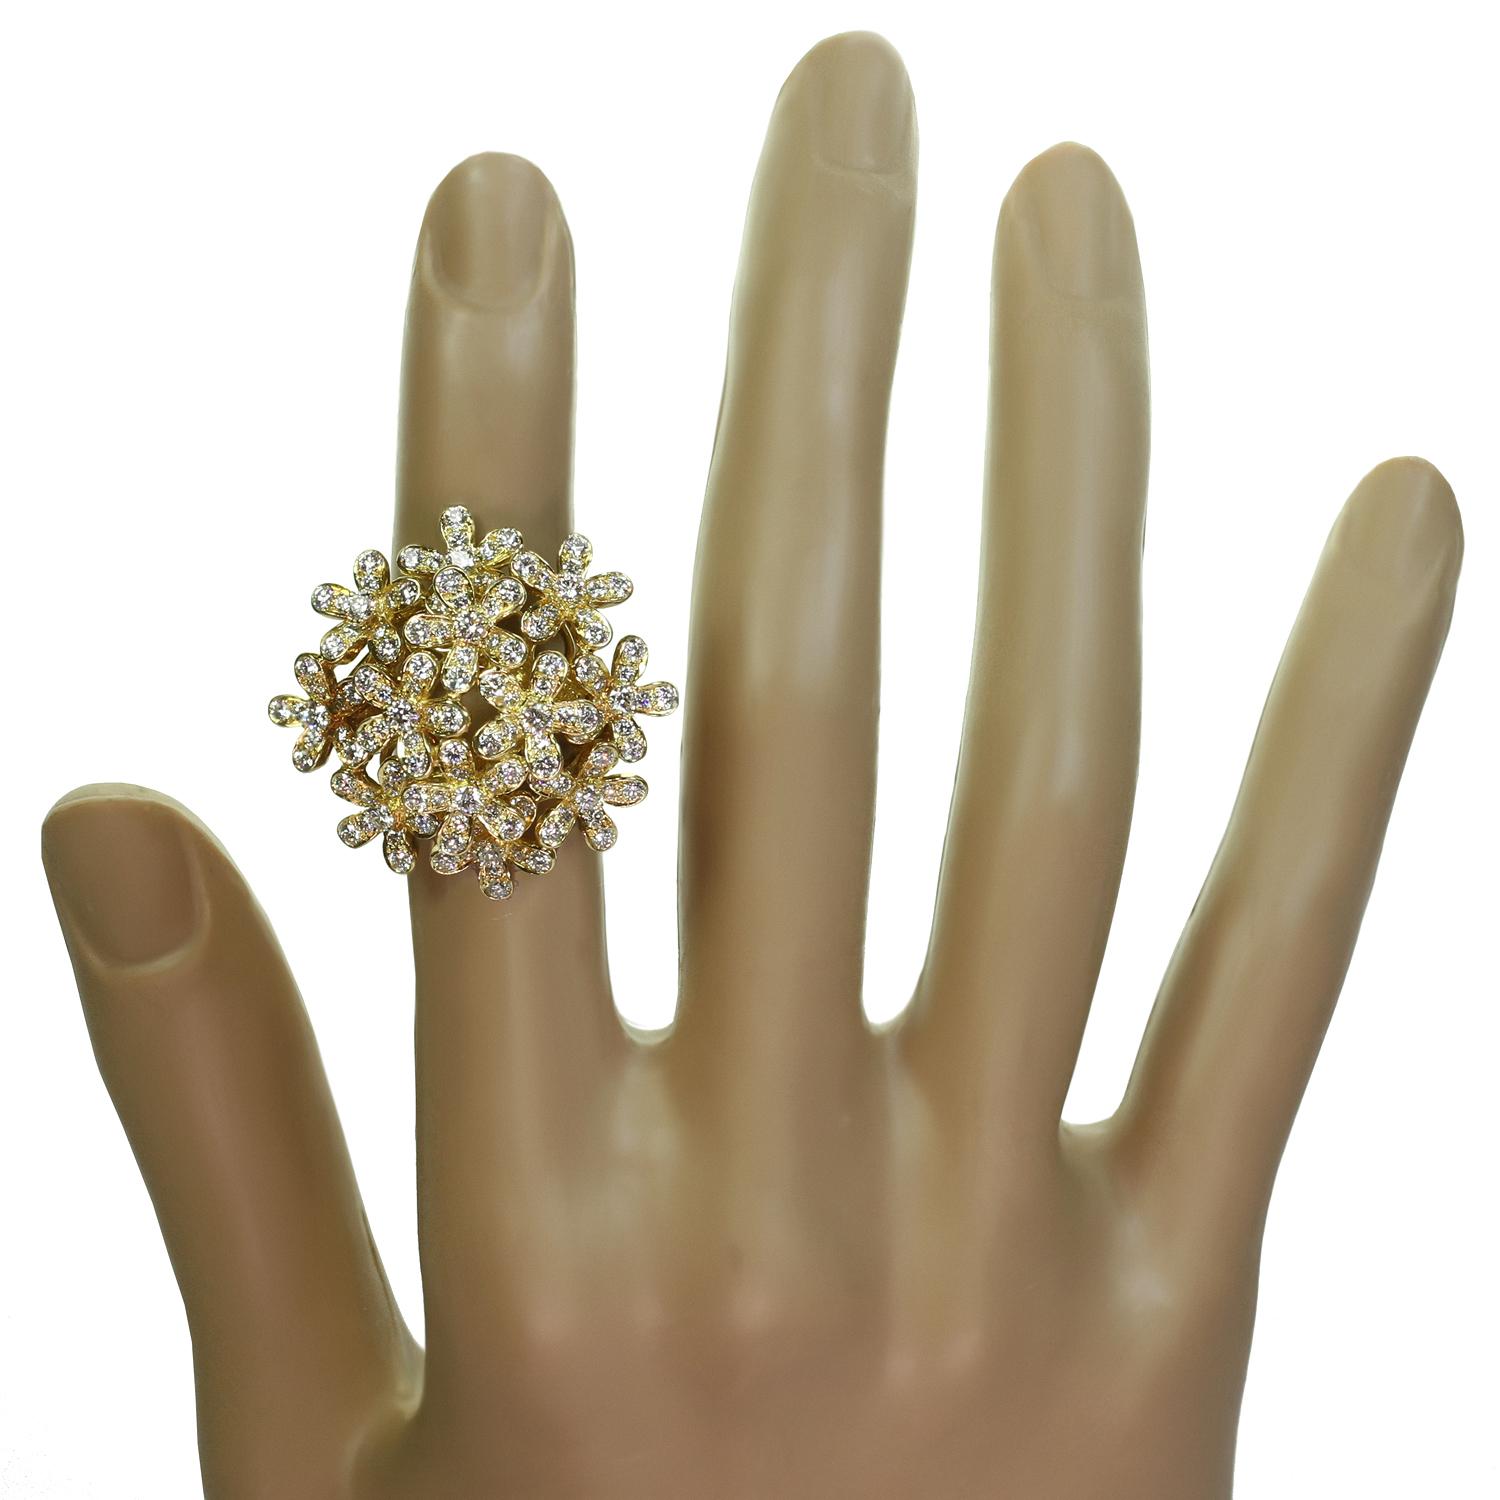 This dazzling Van Cleef & Arpels ring from the iconic Socrate collection features a delicate sparkling floral bouquet crafted in 18k yellow gold and set with 132 brilliant-cut round D-F VVS1-VVS2 diamonds weighing an estimated 3.00 carats. Made in